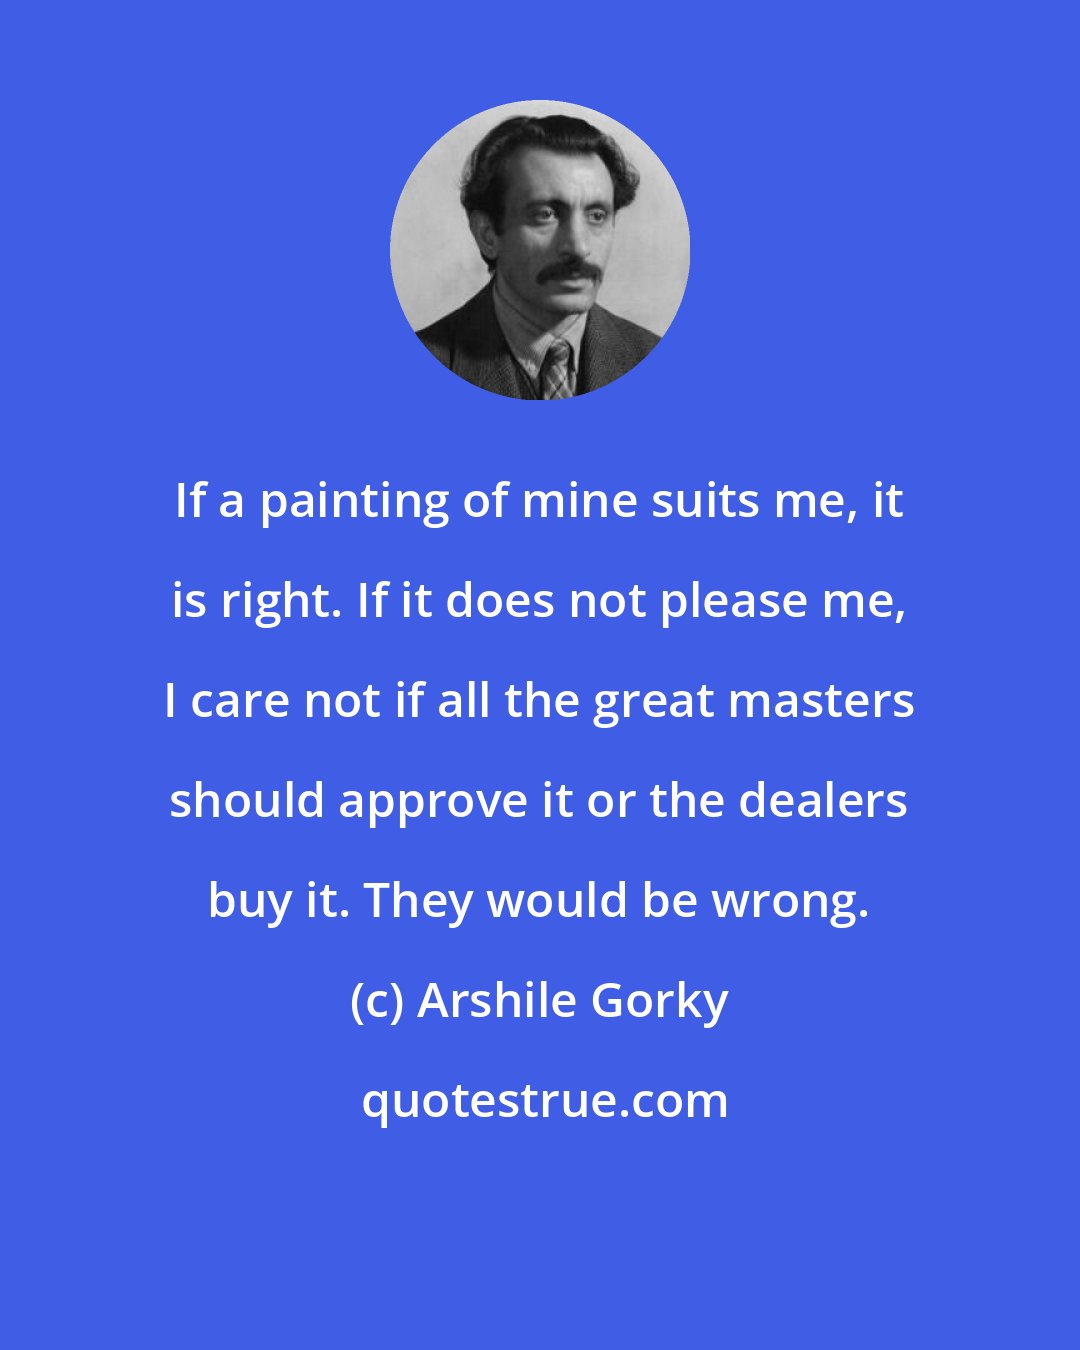 Arshile Gorky: If a painting of mine suits me, it is right. If it does not please me, I care not if all the great masters should approve it or the dealers buy it. They would be wrong.